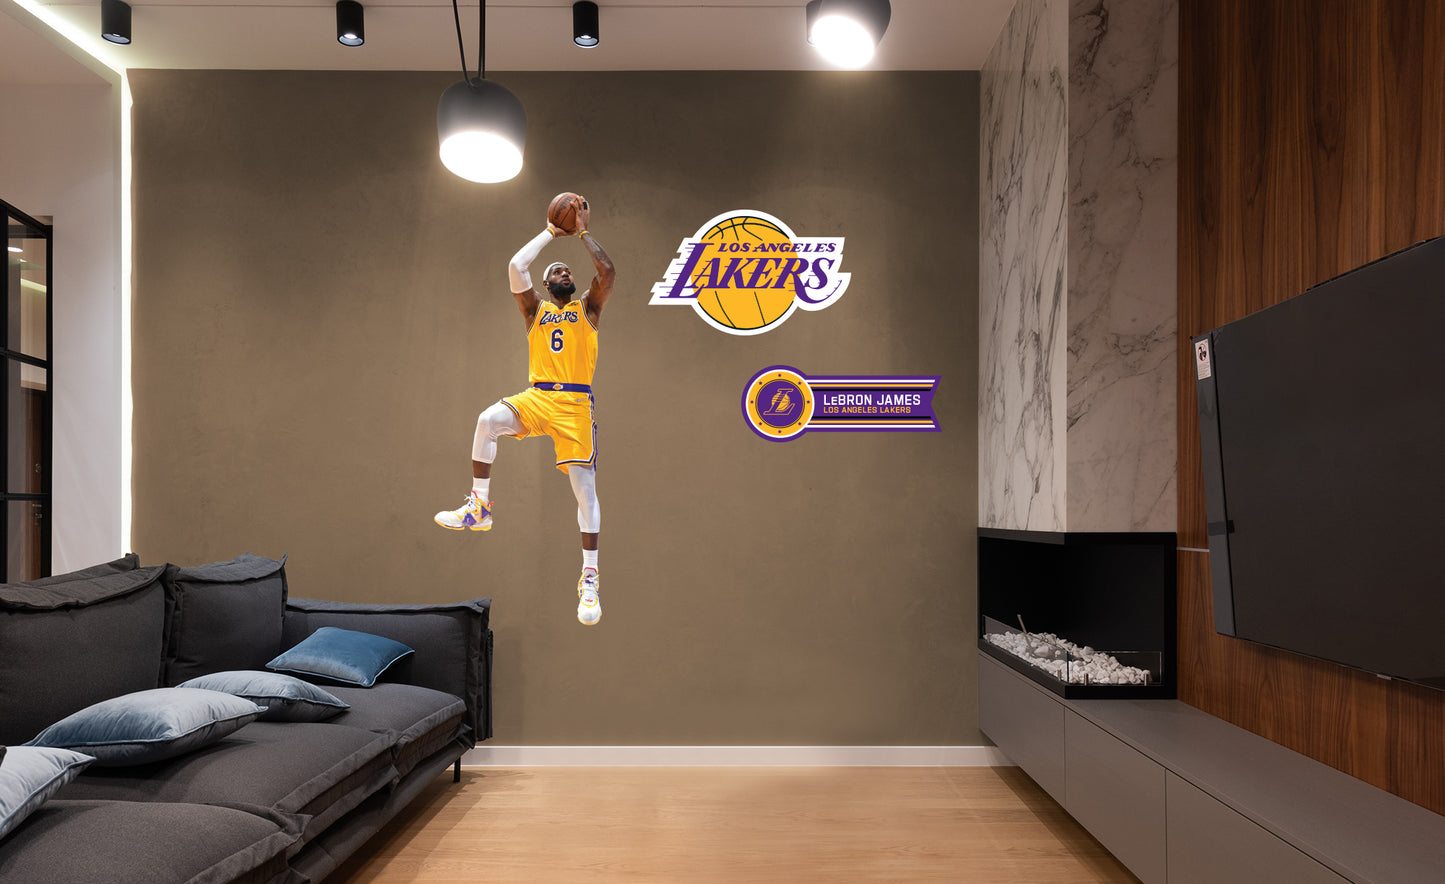 Los Angeles Lakers: LeBron James Fadeaway - Officially Licensed NBA Removable Adhesive Decal